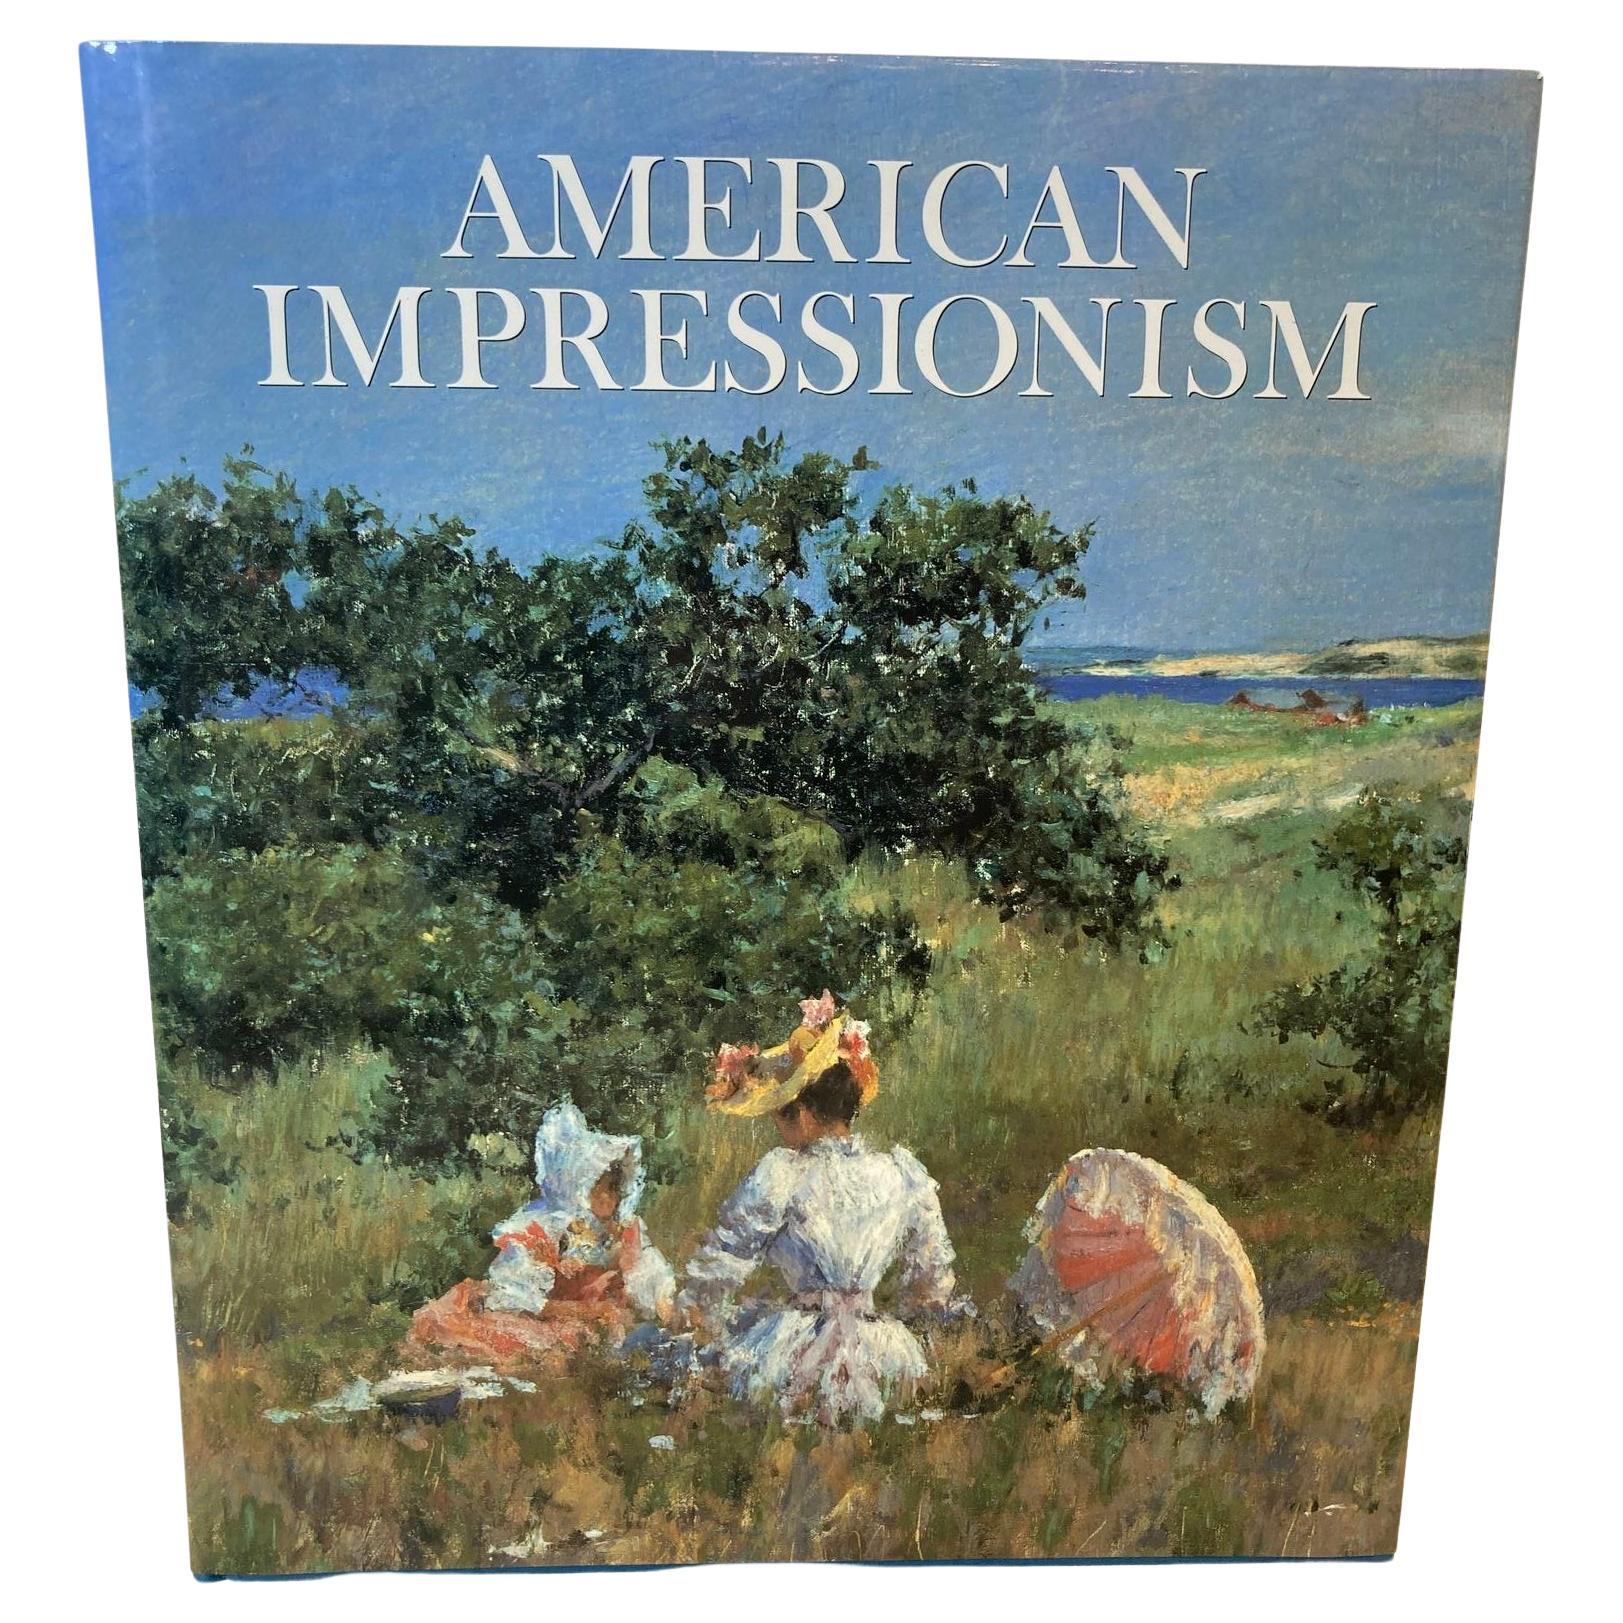 American Impressionism Oversized Hardcover Book by William H. Gerdts For Sale